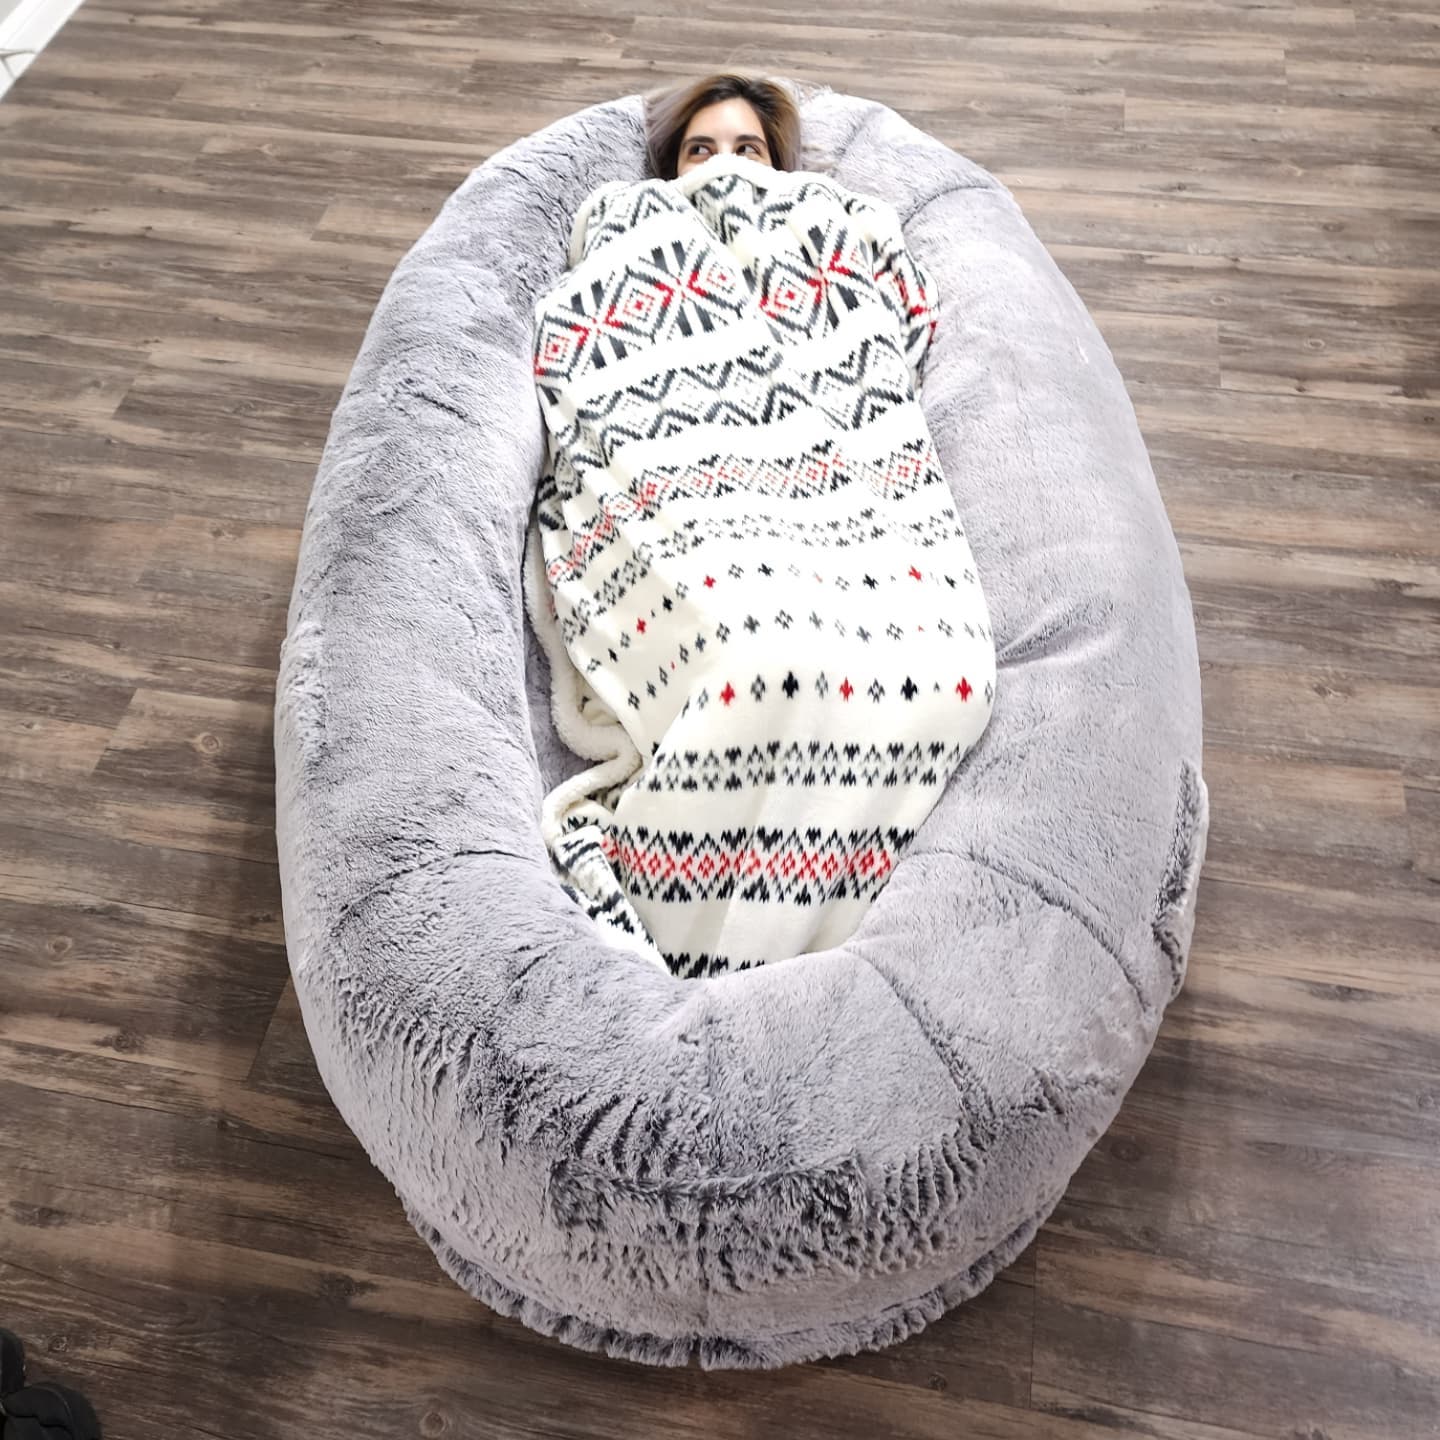 Soothing Cloud: Human Dog Bed